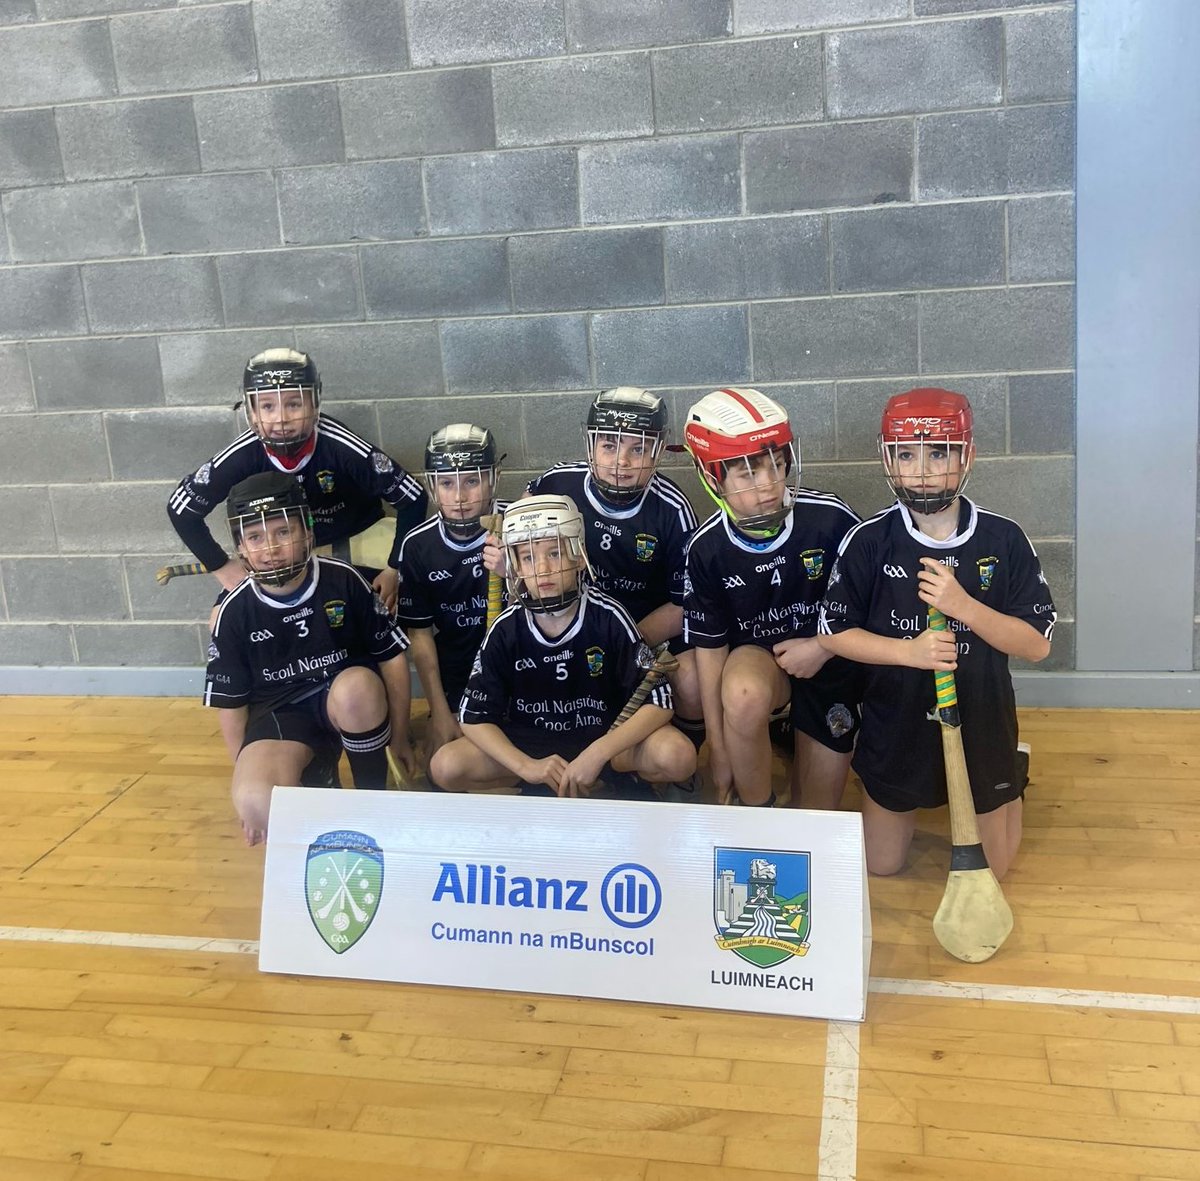 More hurlers of the future pictured at the indoor hurling blitz organised by South Limerick Cumann na mBunscol @ScoilMocheallog @KnockaineyGaa @southlimkgaa @MunGAABunscol @kilbehennyns @Galtee_GaelsGAA